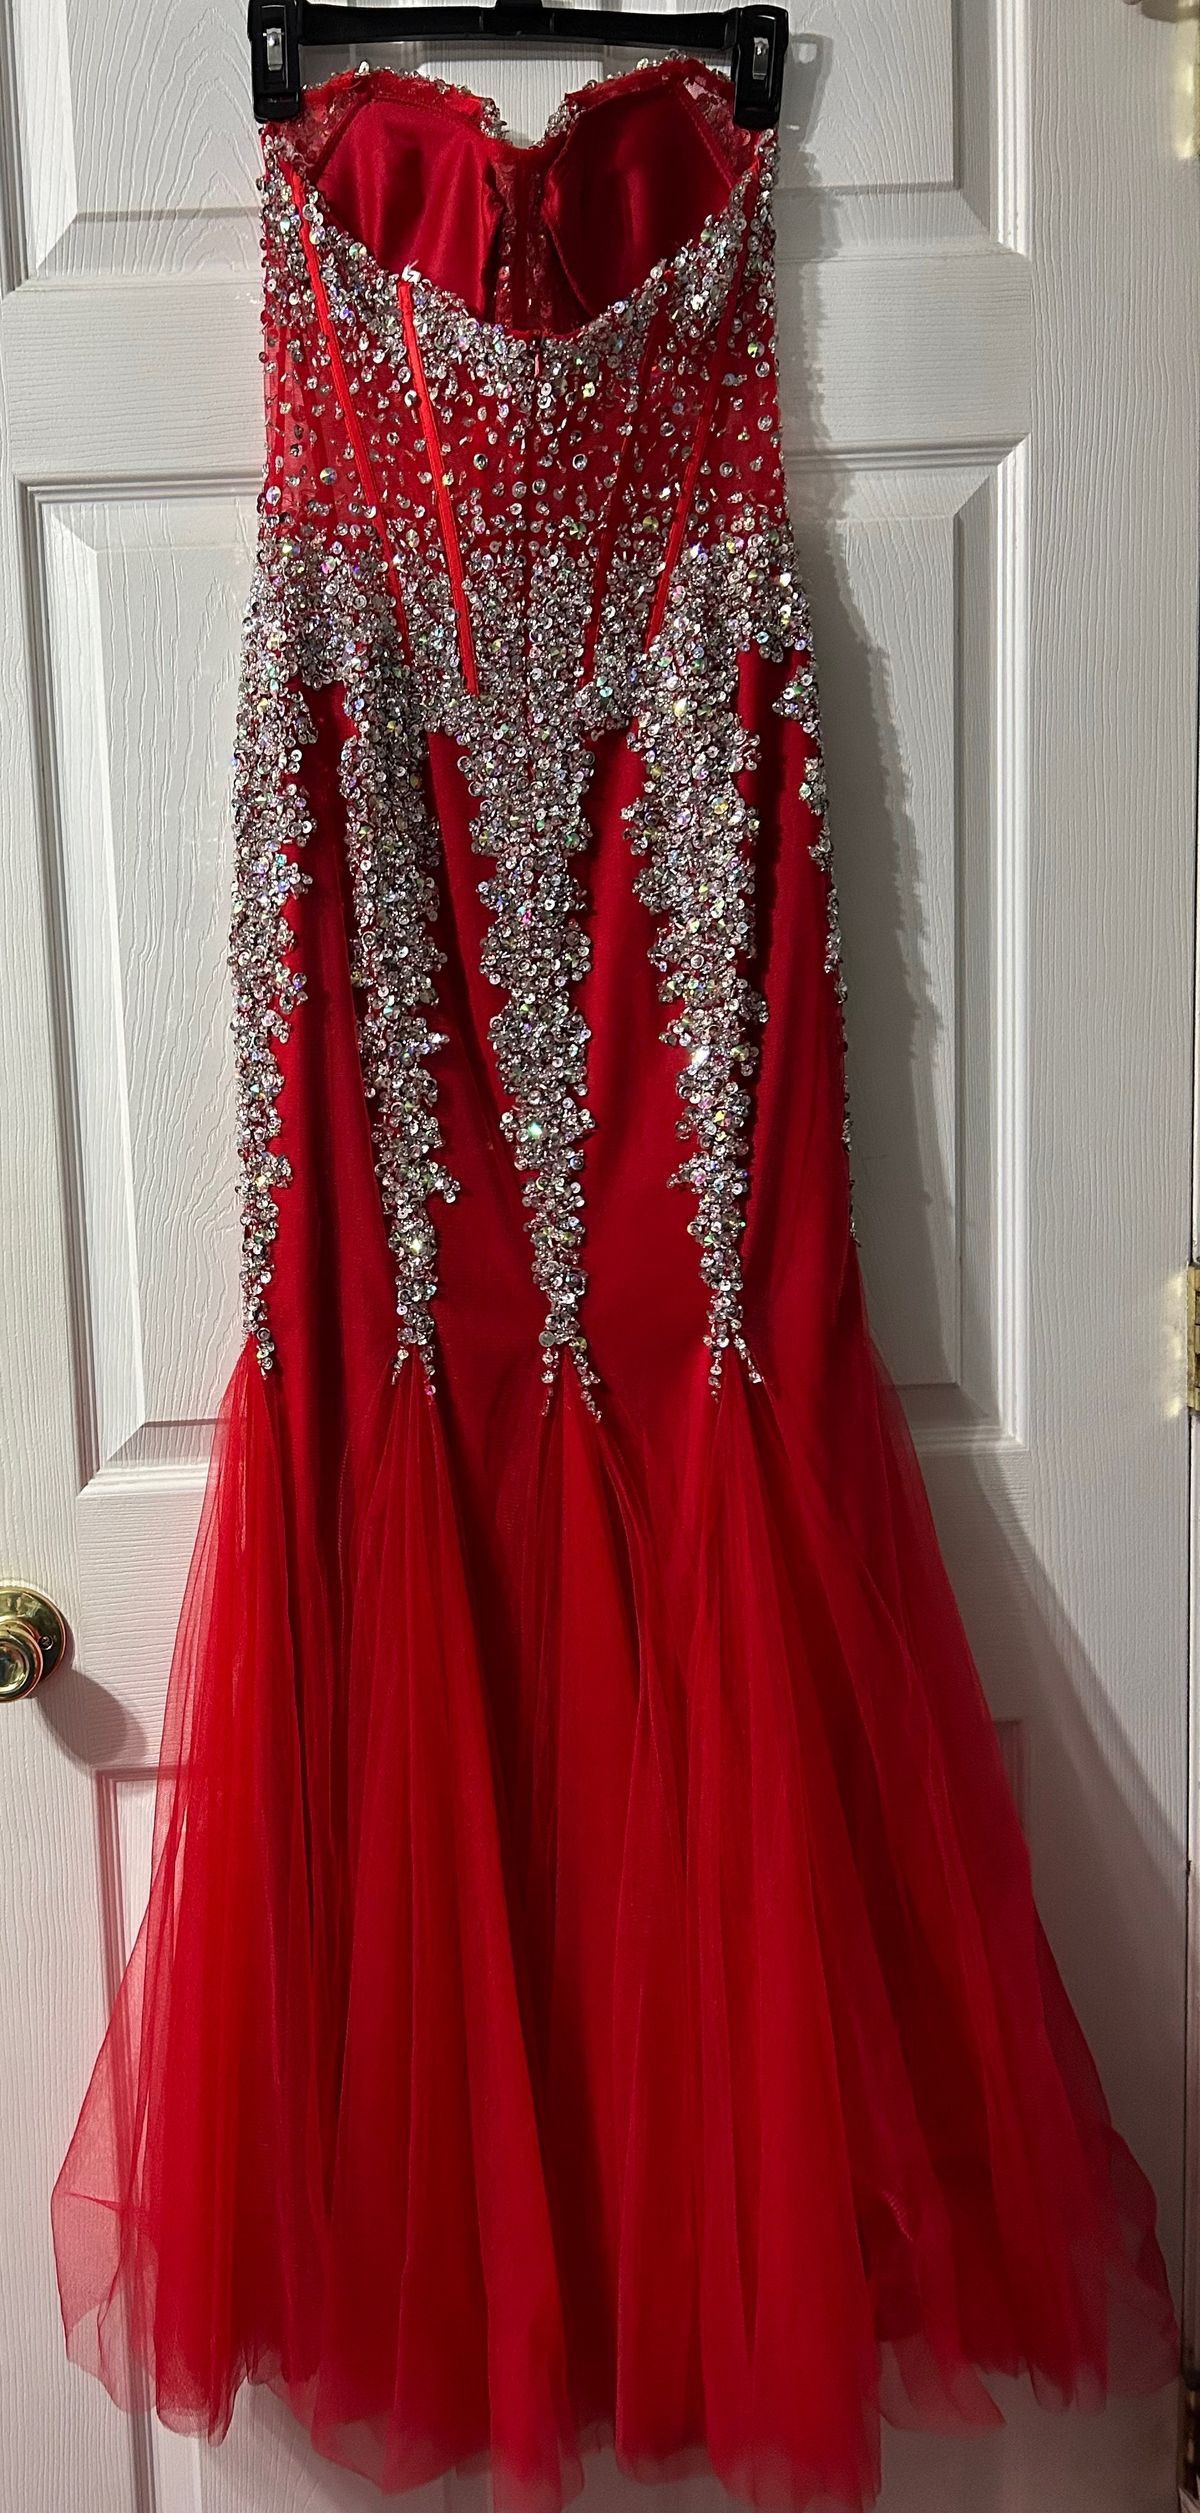 Style Mermaid Jovani Size 10 Prom Strapless Sequined Red Mermaid Dress on Queenly